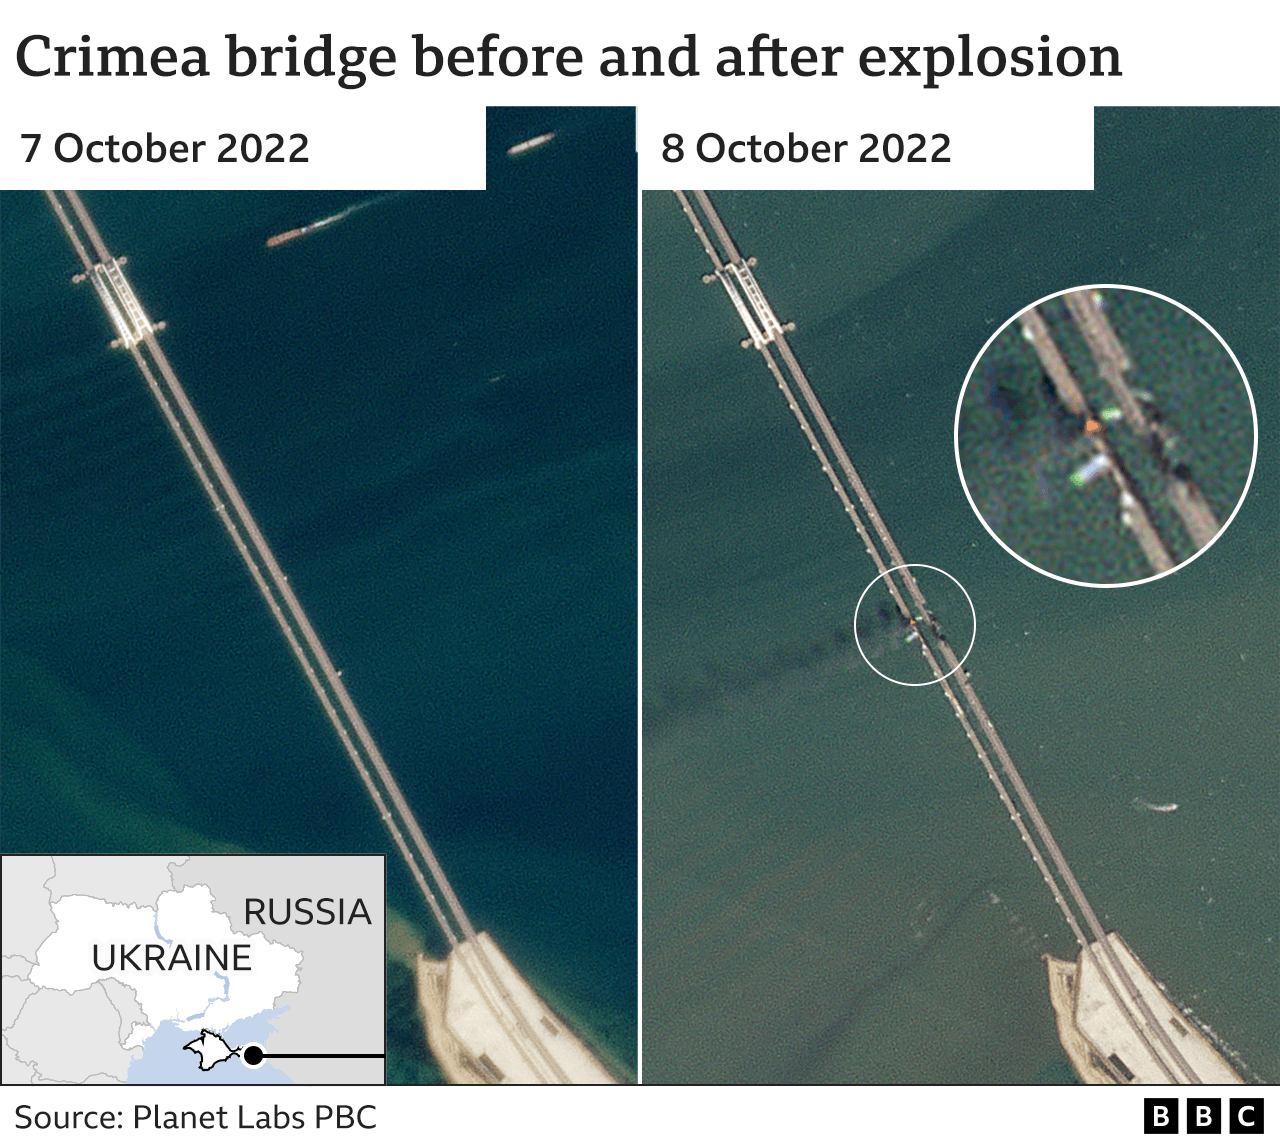 Crimea bridge partly reopens after huge explosion - Russia - BBC News